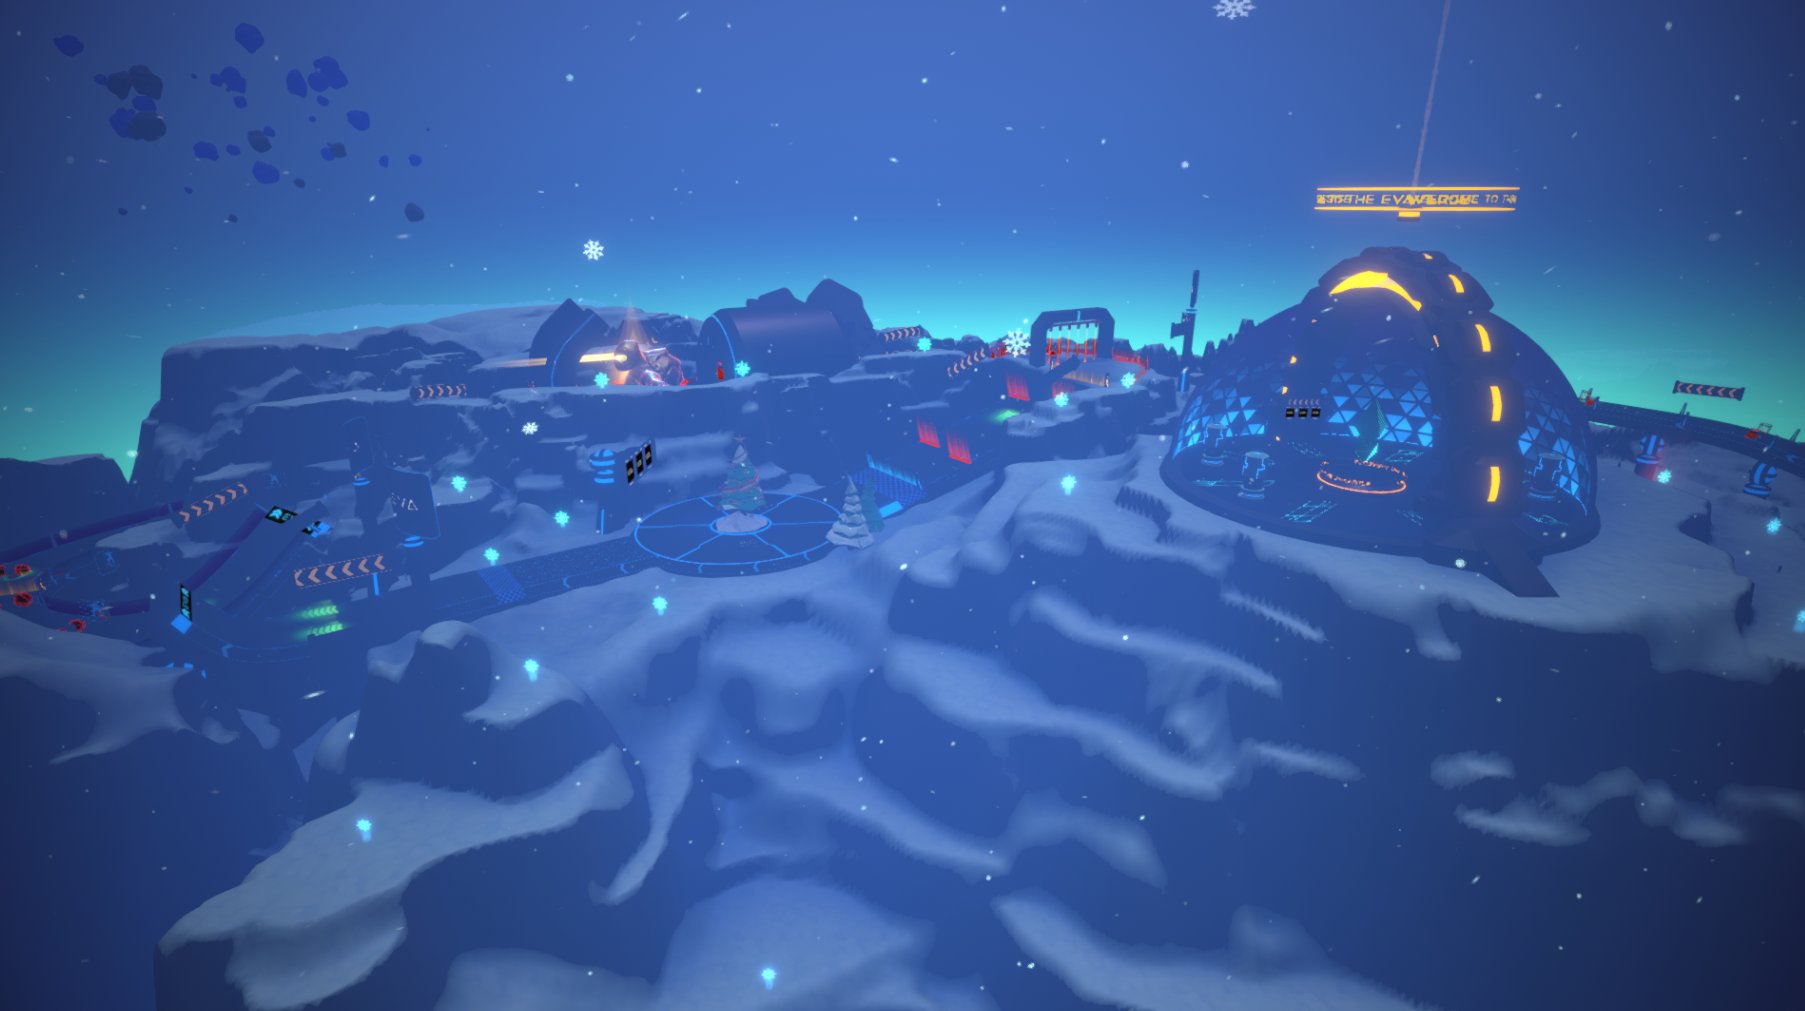 In-game view of the special Wonderland map in the Evaverse metaverse